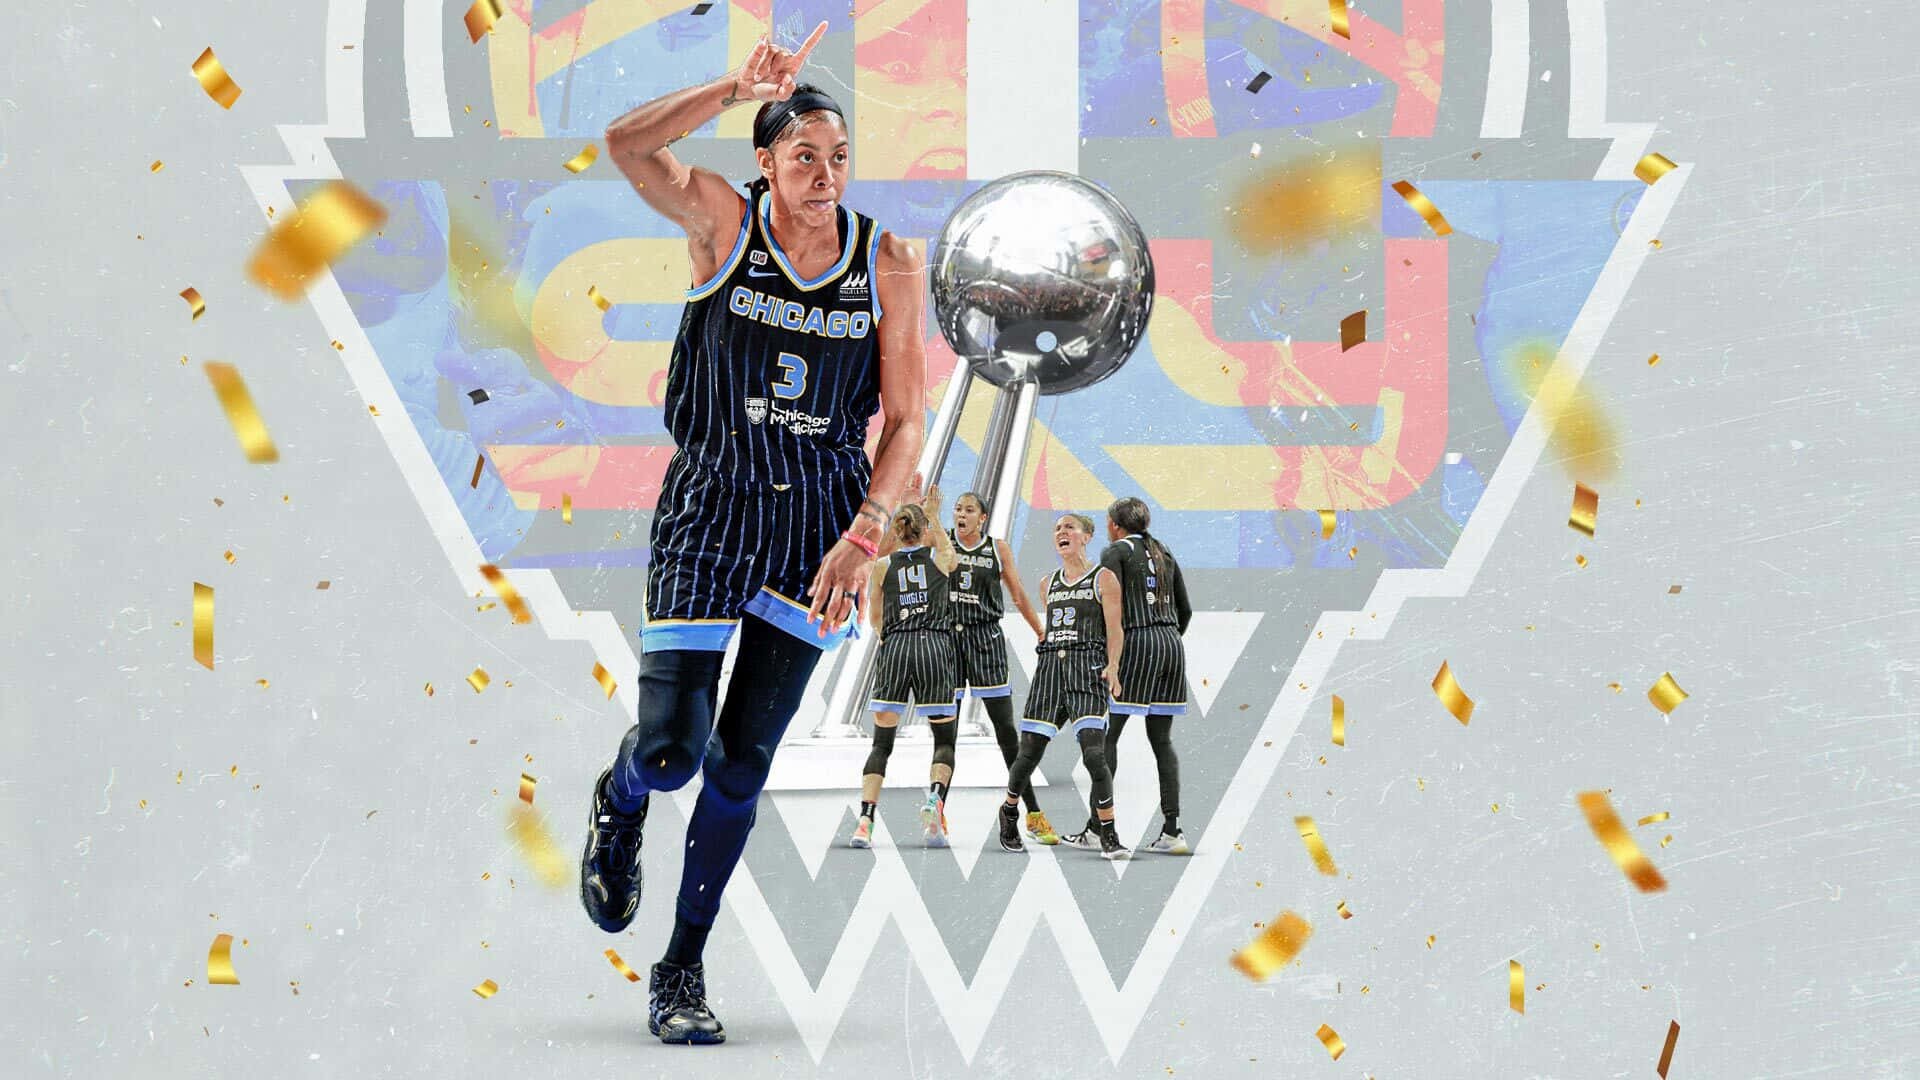 A Basketball Player Is Holding A Trophy And Confetti Wallpaper